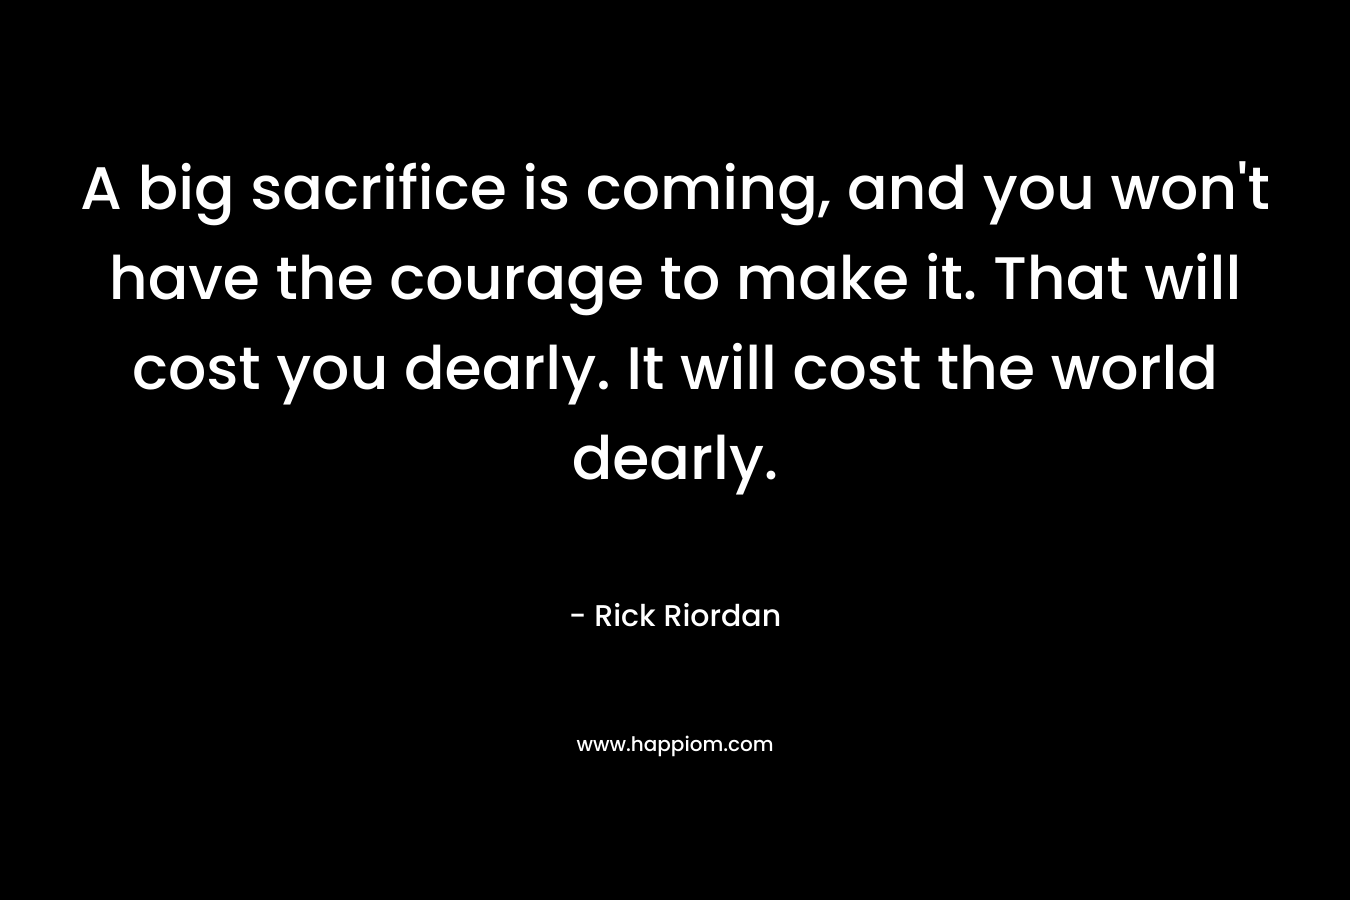 A big sacrifice is coming, and you won't have the courage to make it. That will cost you dearly. It will cost the world dearly.